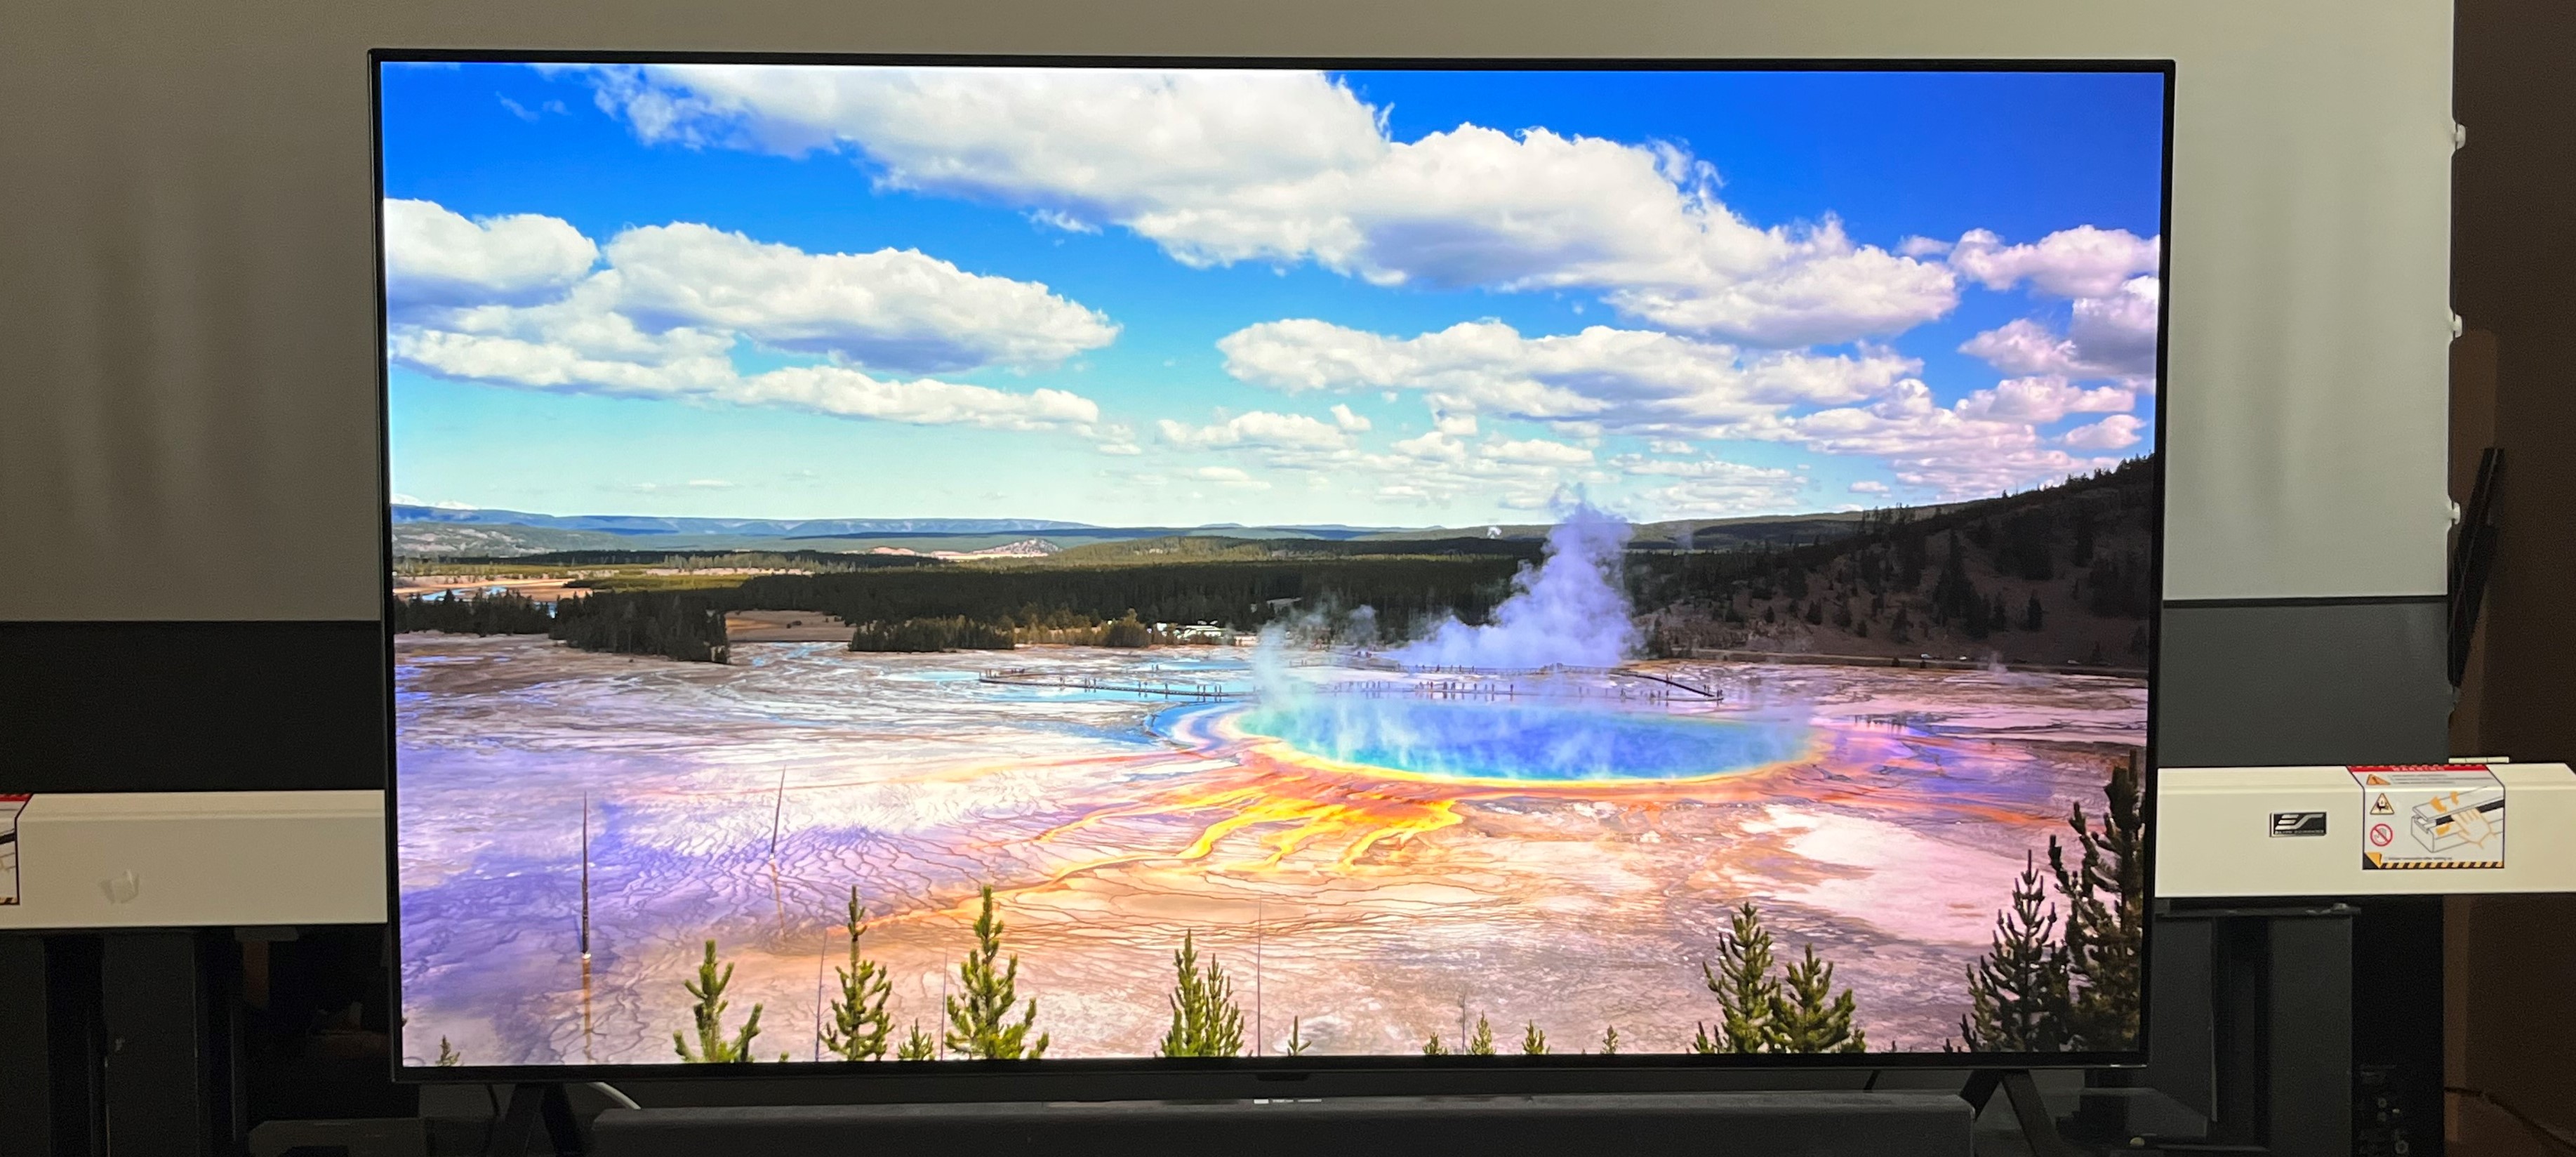 LG A2 OLED TV with landscape screen